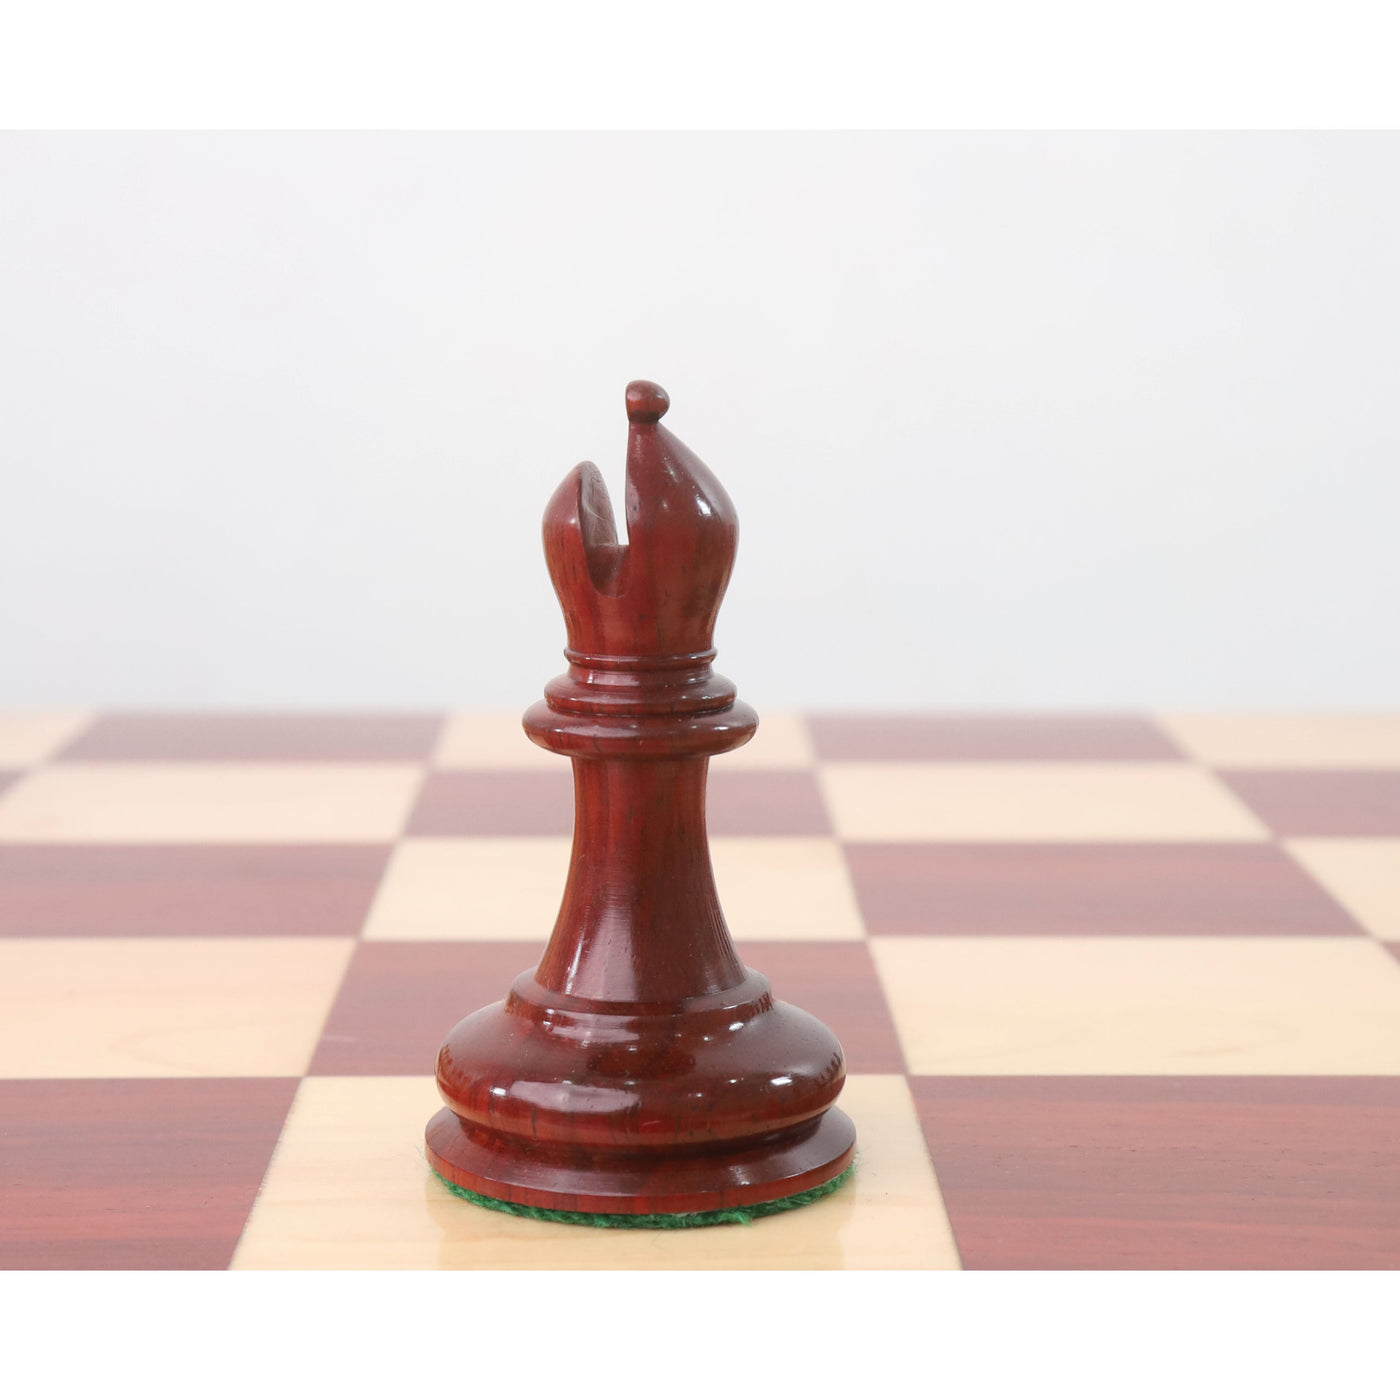 Slightly Imperfect 1849 Jacques Cook Staunton Collectors Chess Set - Chess Pieces Only- Bud Rosewood - 3.75"